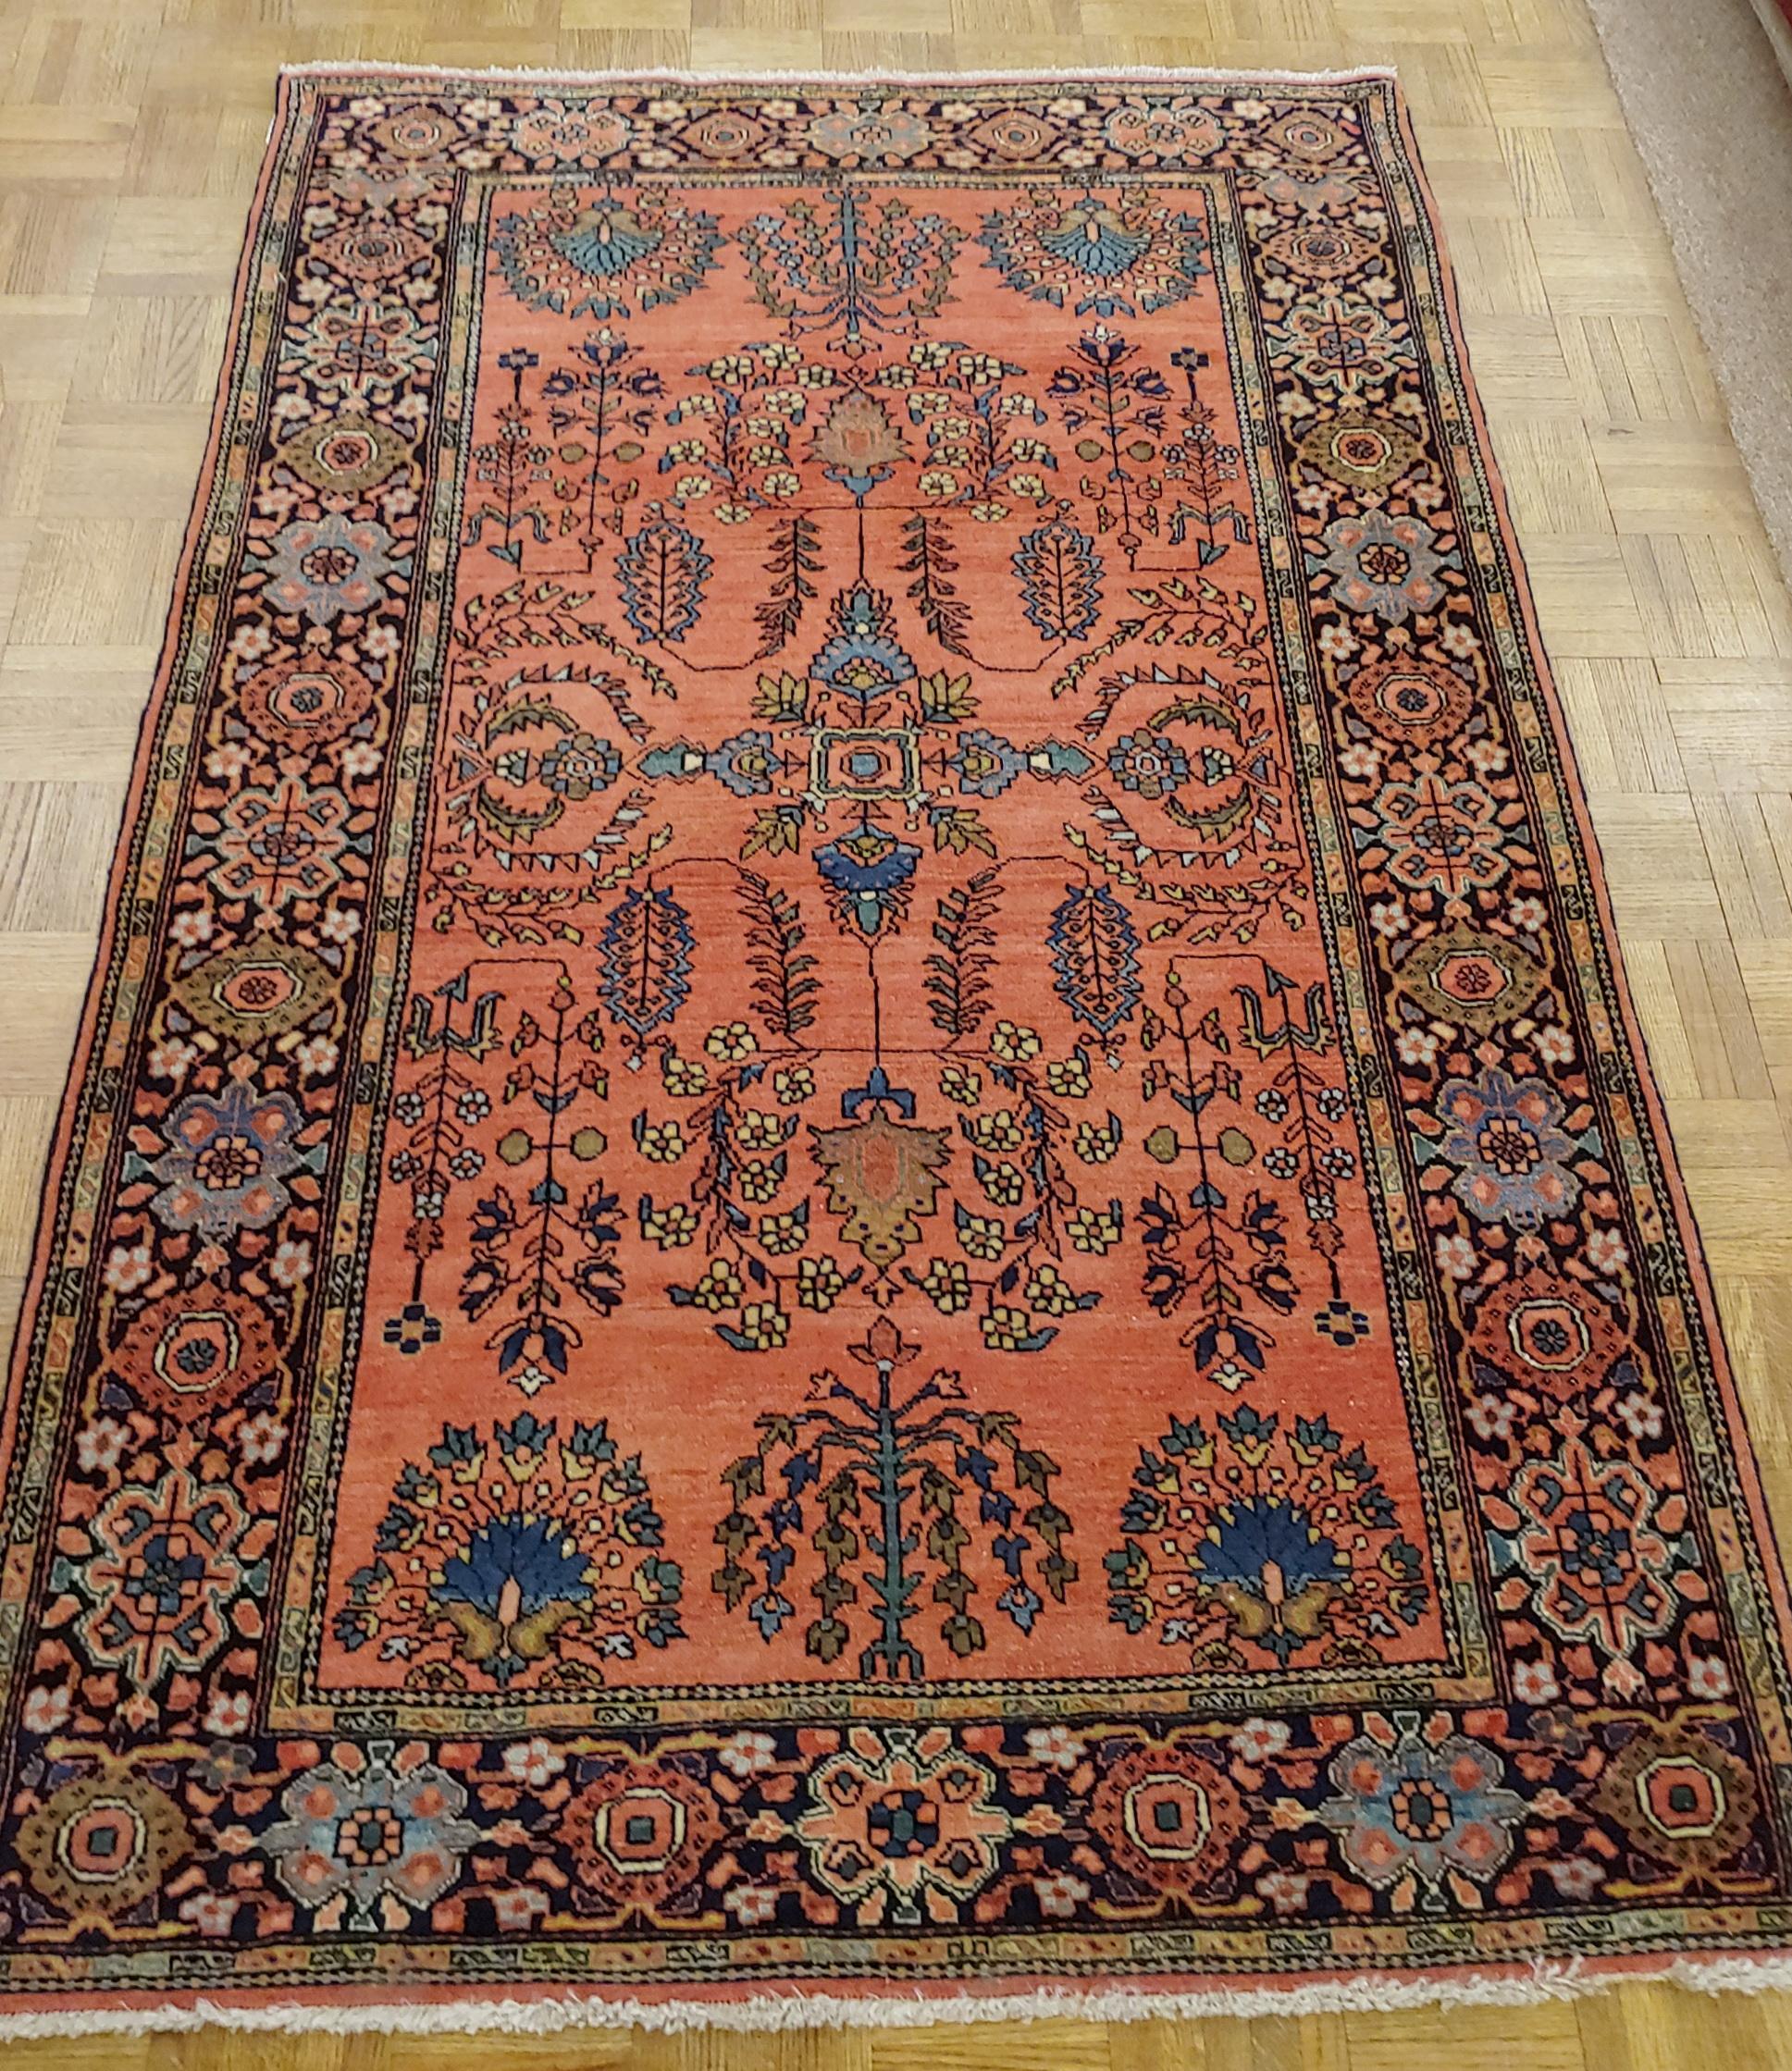 This lovely little Persian Mahajiran Sarouk is fabulous. It is circa 1910 in almost perfect condition. The rust field is decorated with light blue and green flowers. The wool feels like silk. It is a scatter size: 3-4 x 5-1.